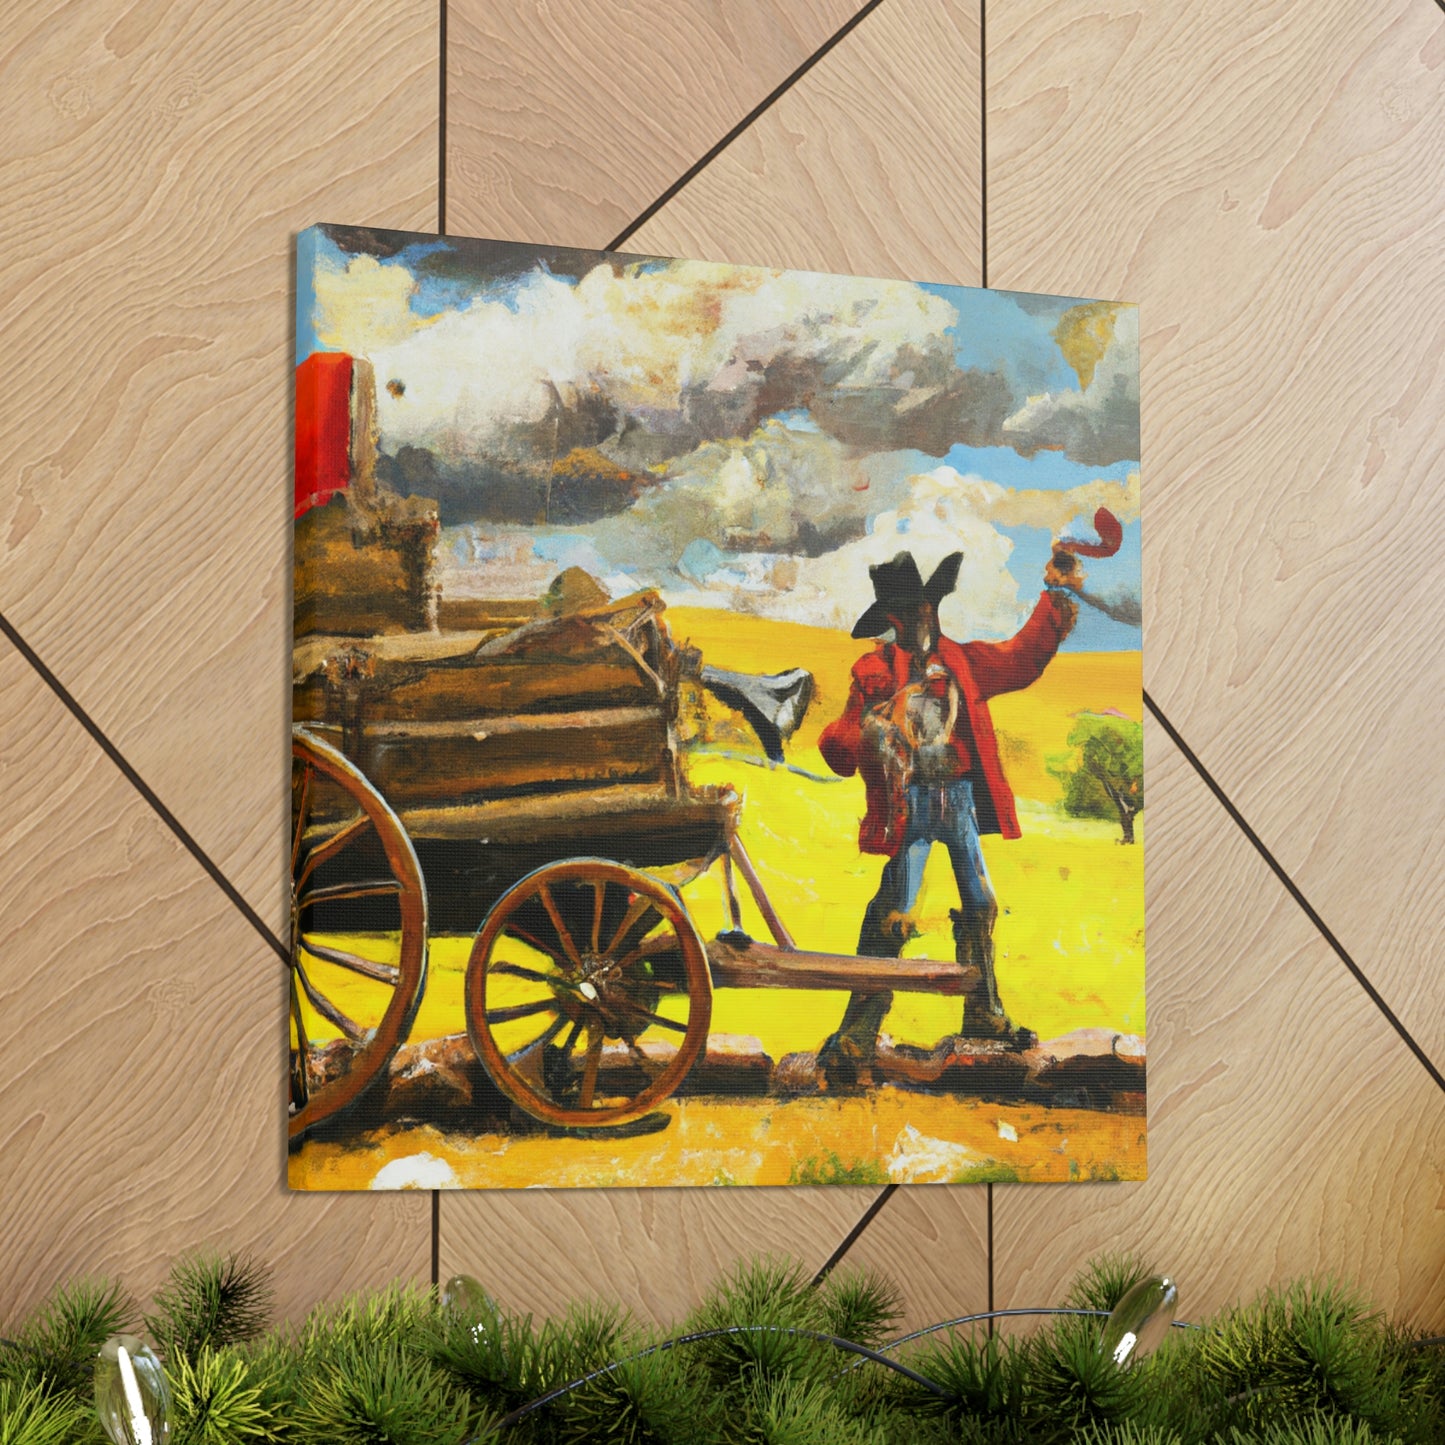 "Wagon of Possibilities" - Canvas